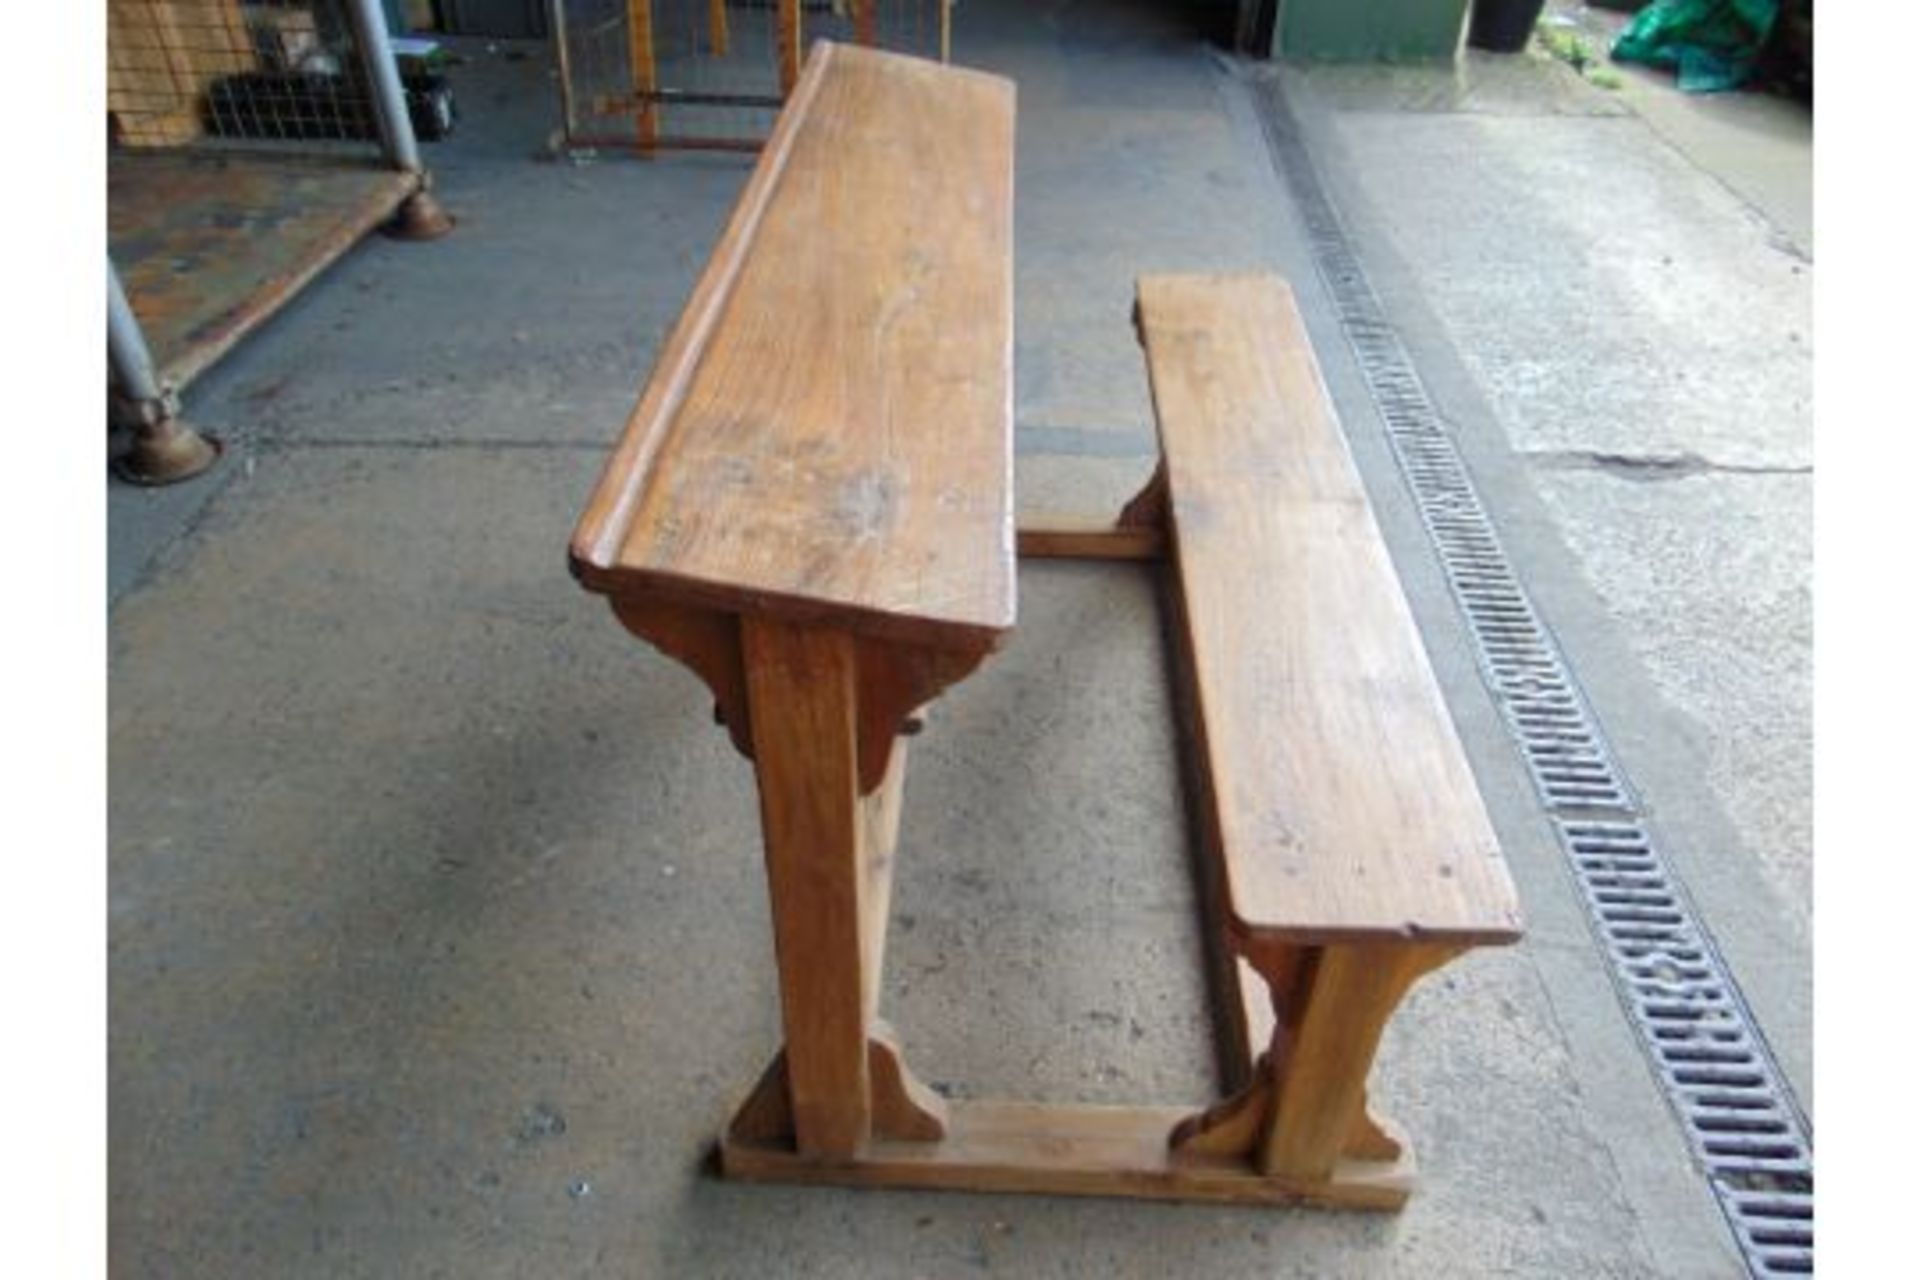 Antique Traditional Wooden School Bench Desk - Image 4 of 6